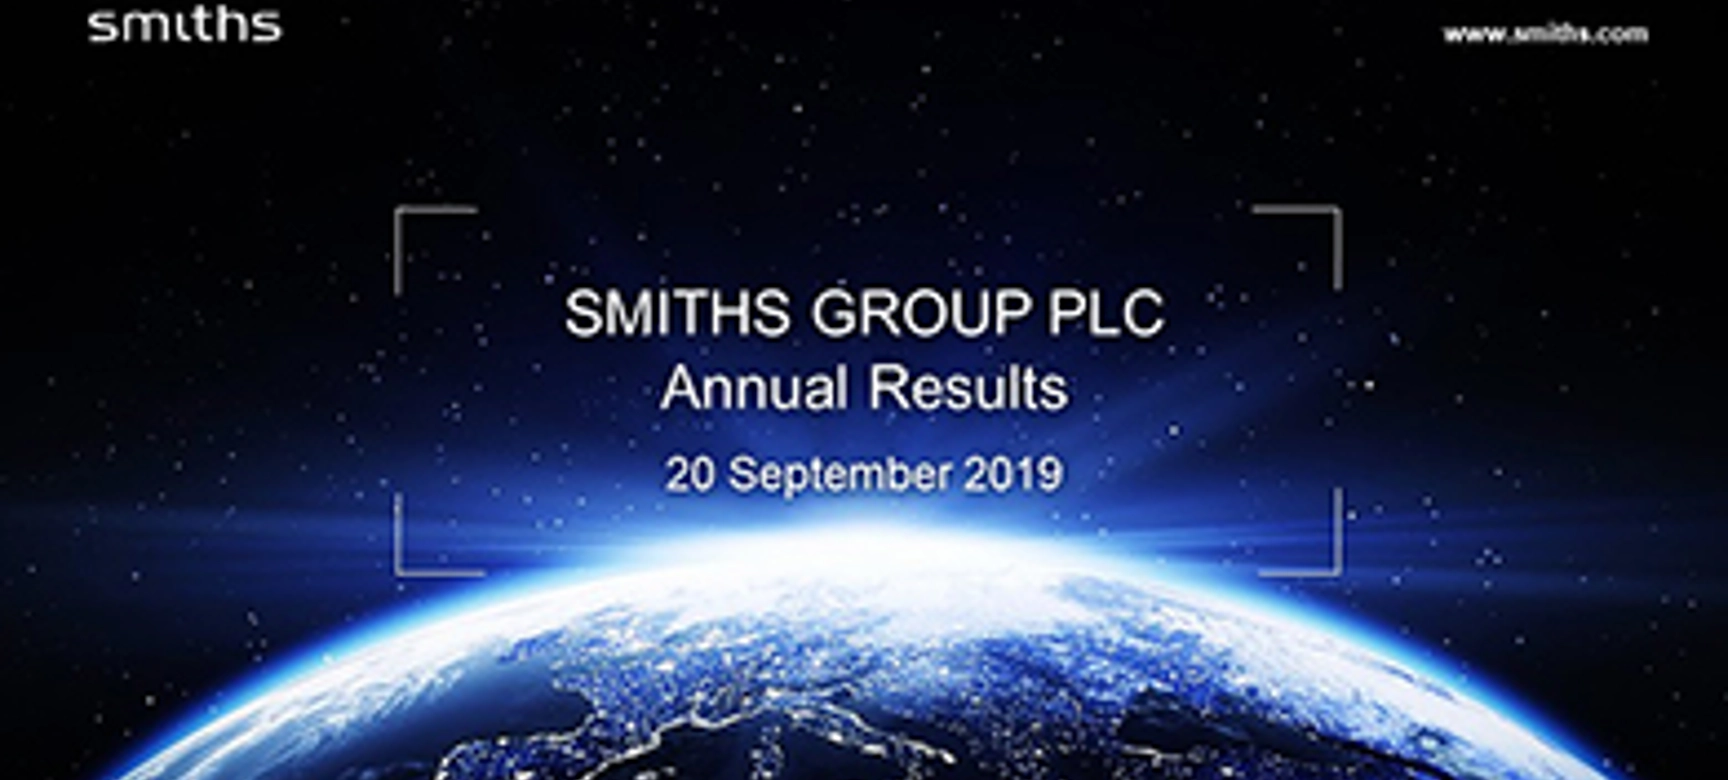 Annual Results 2019